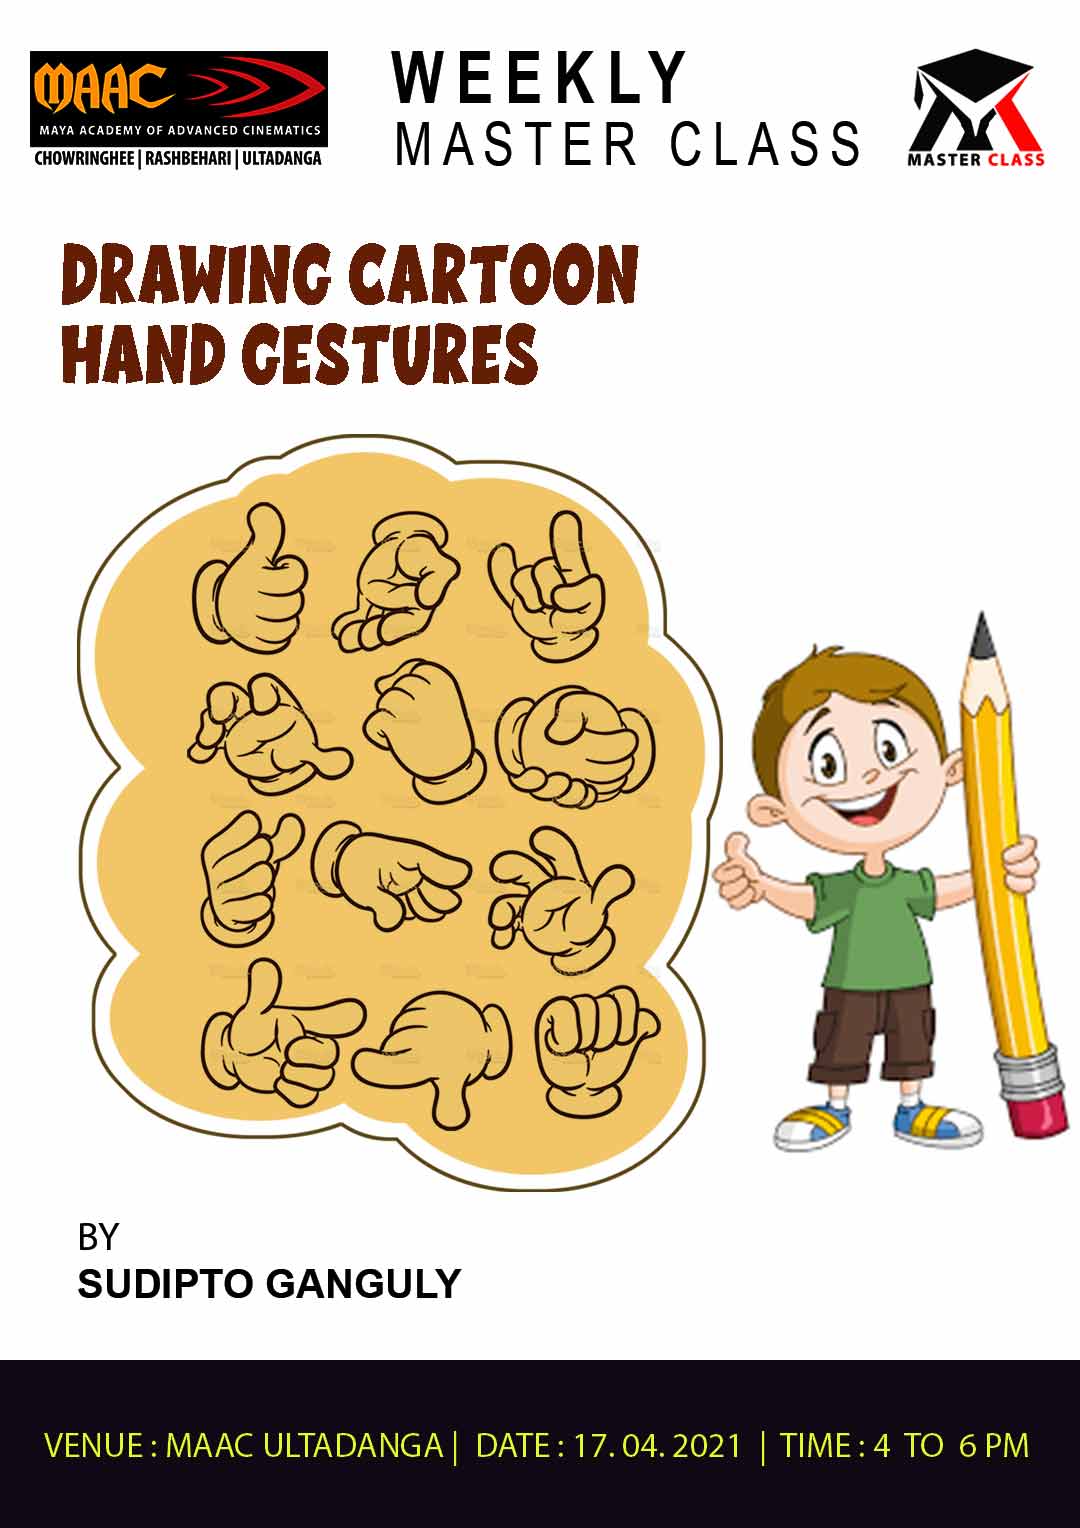 Weekly Master Class on Drawing Cartoon Hand Gestures